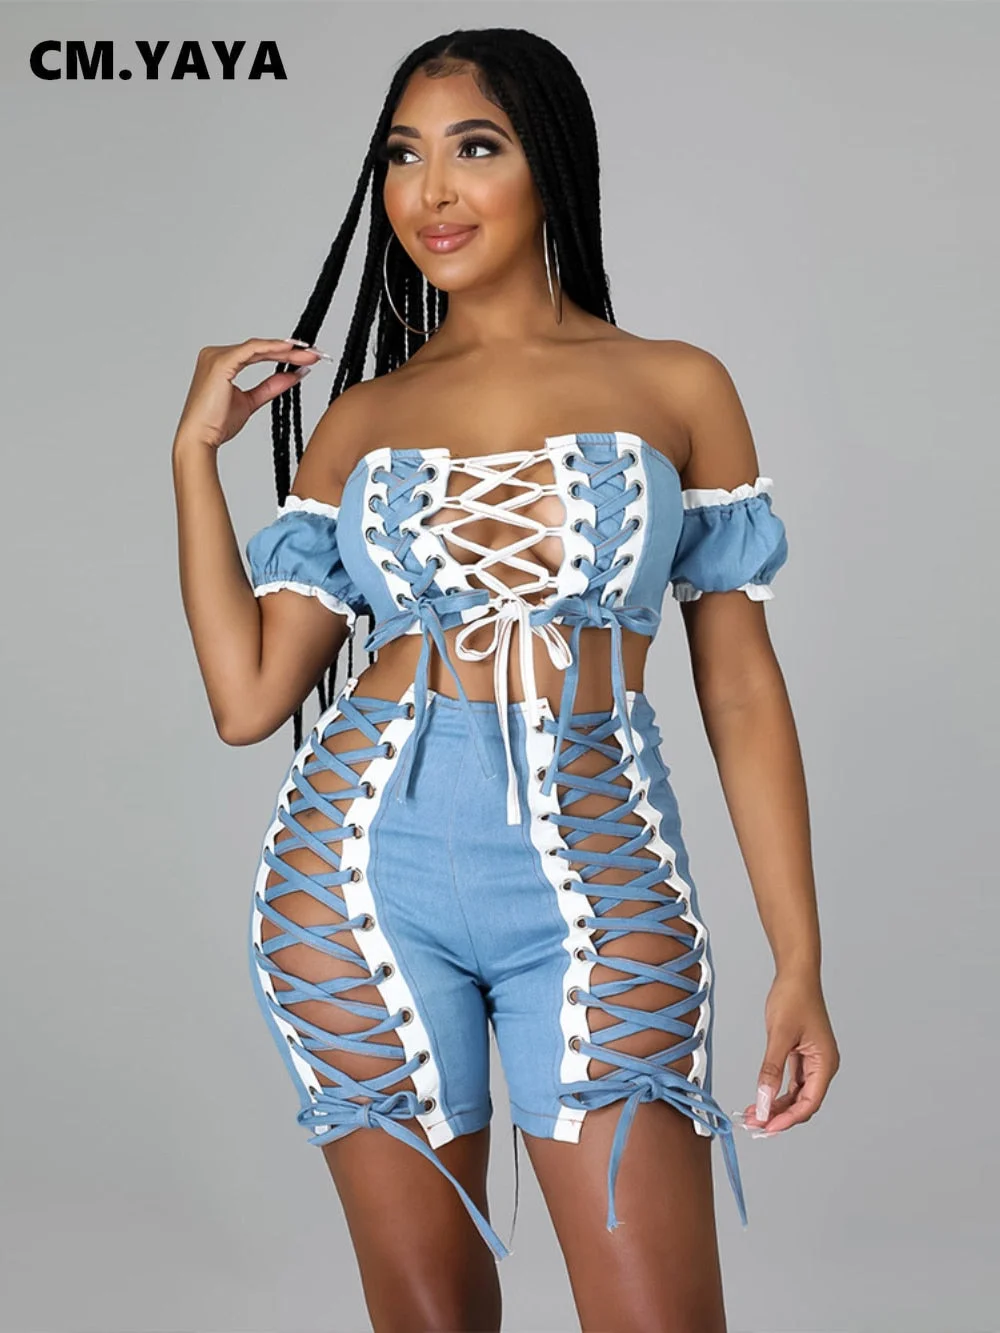 CM.YAYA Elegant Lace Up Hollow Out Two 2 Piece Set Outfits for Women 2022 Summer Off Shoulder Crop Tops and Shorts Matching Set